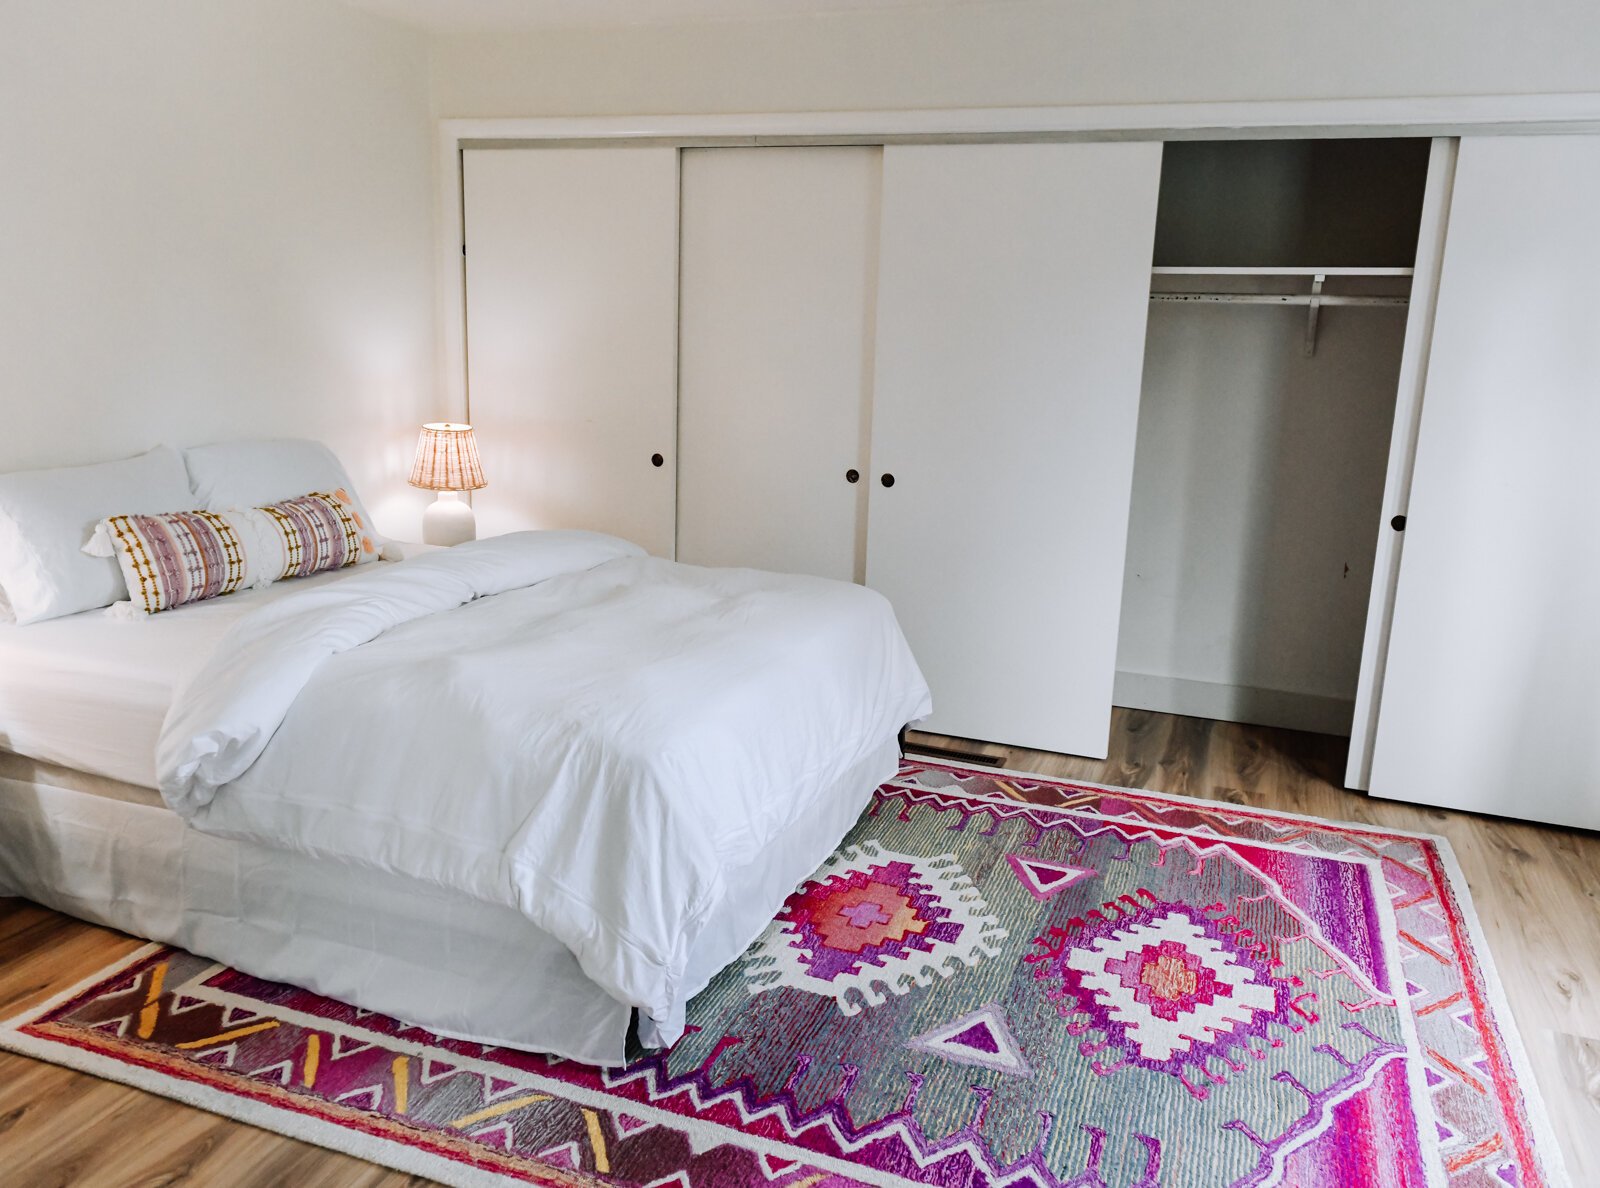 One of the bedrooms features tons of storage and a pop of color with a pink rug.